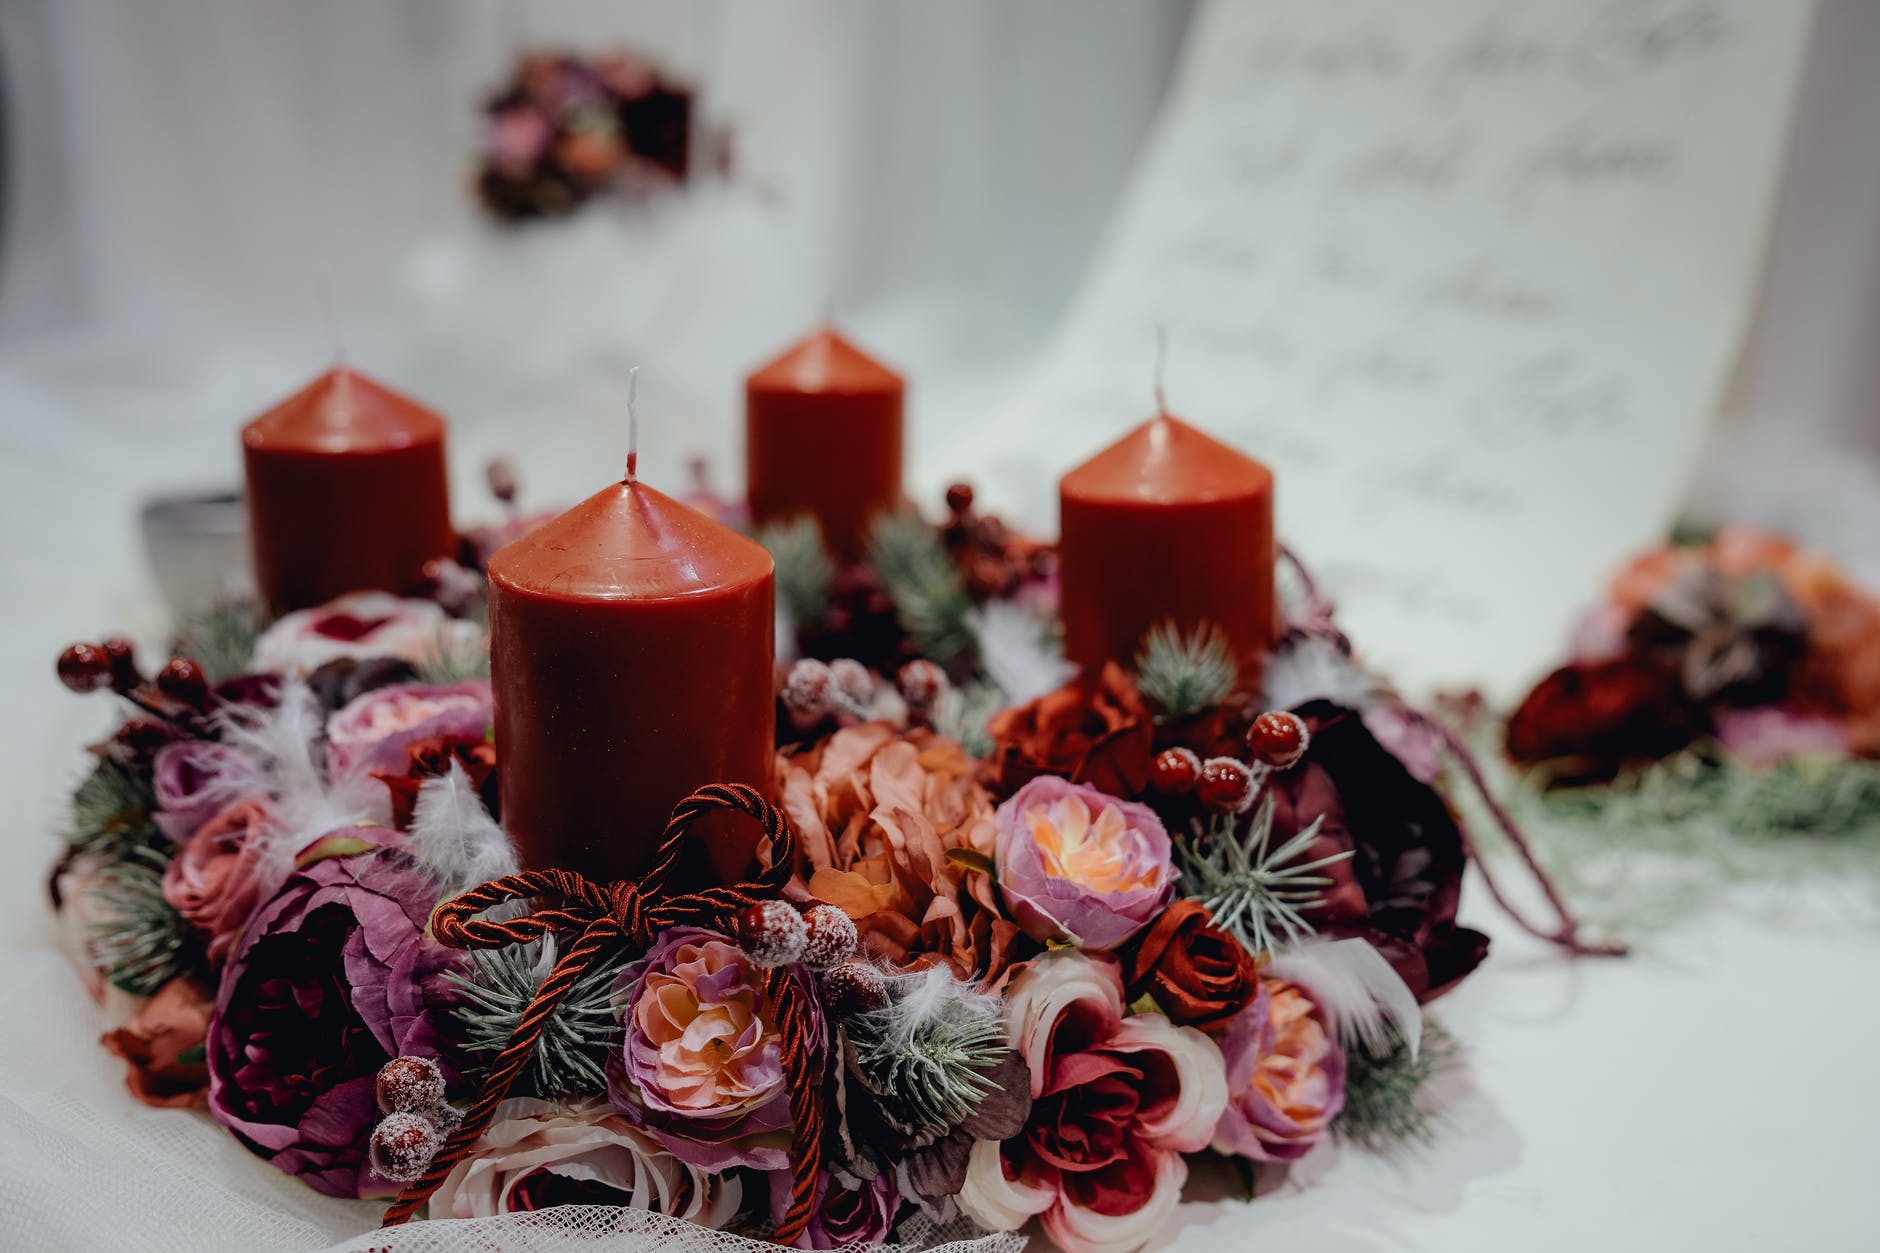 Advent for Uncertain Hearts – an Advent Candle series